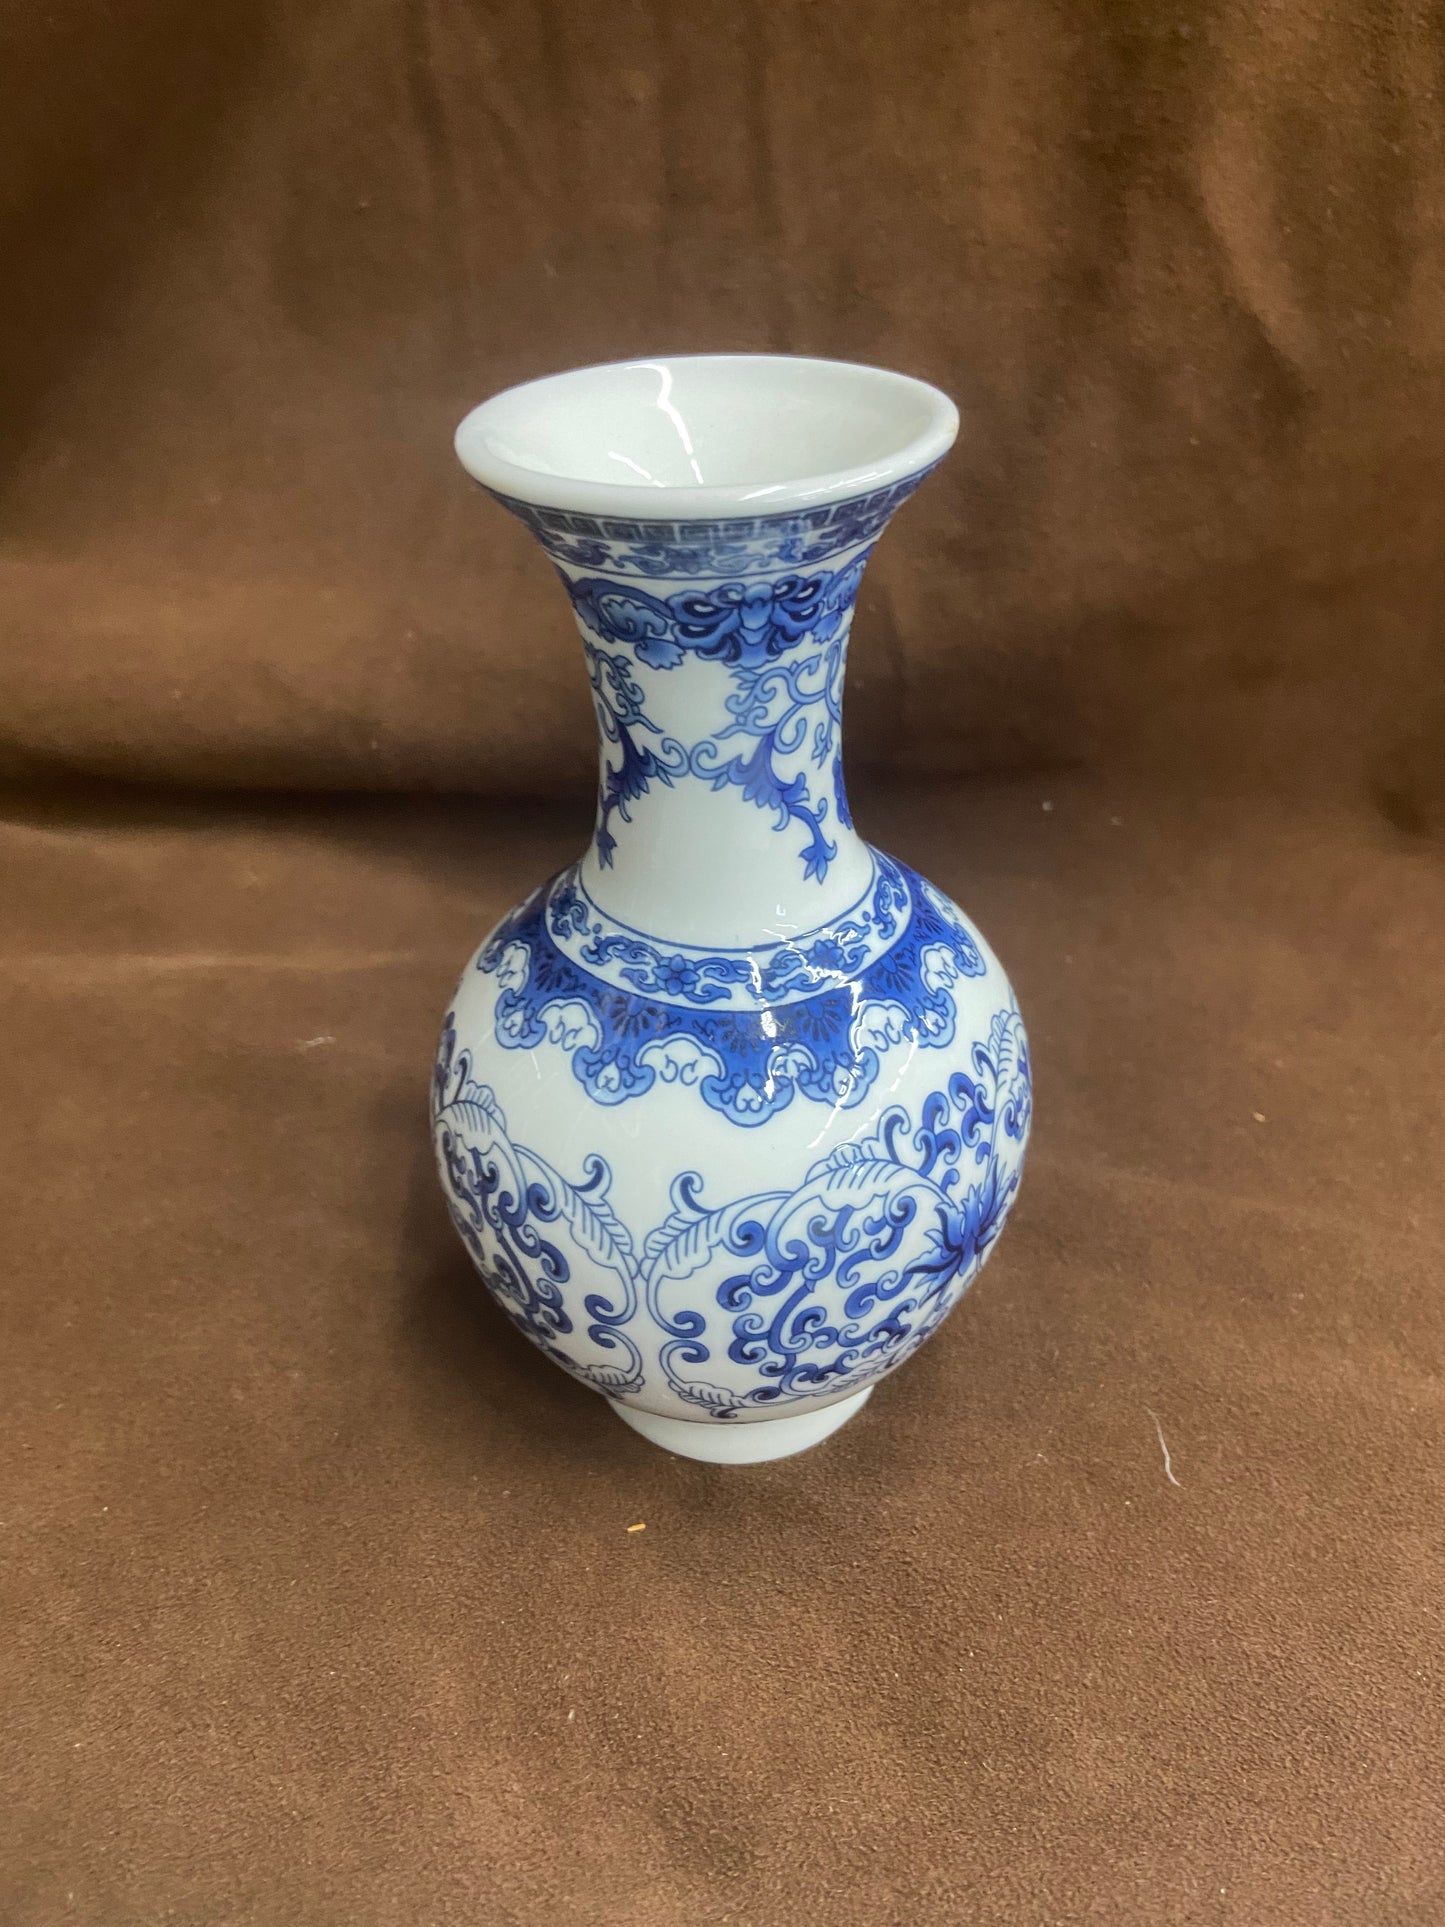 Anti Traditional Chinese Blue and White Porcelain Vase for Flowers Floral Vase